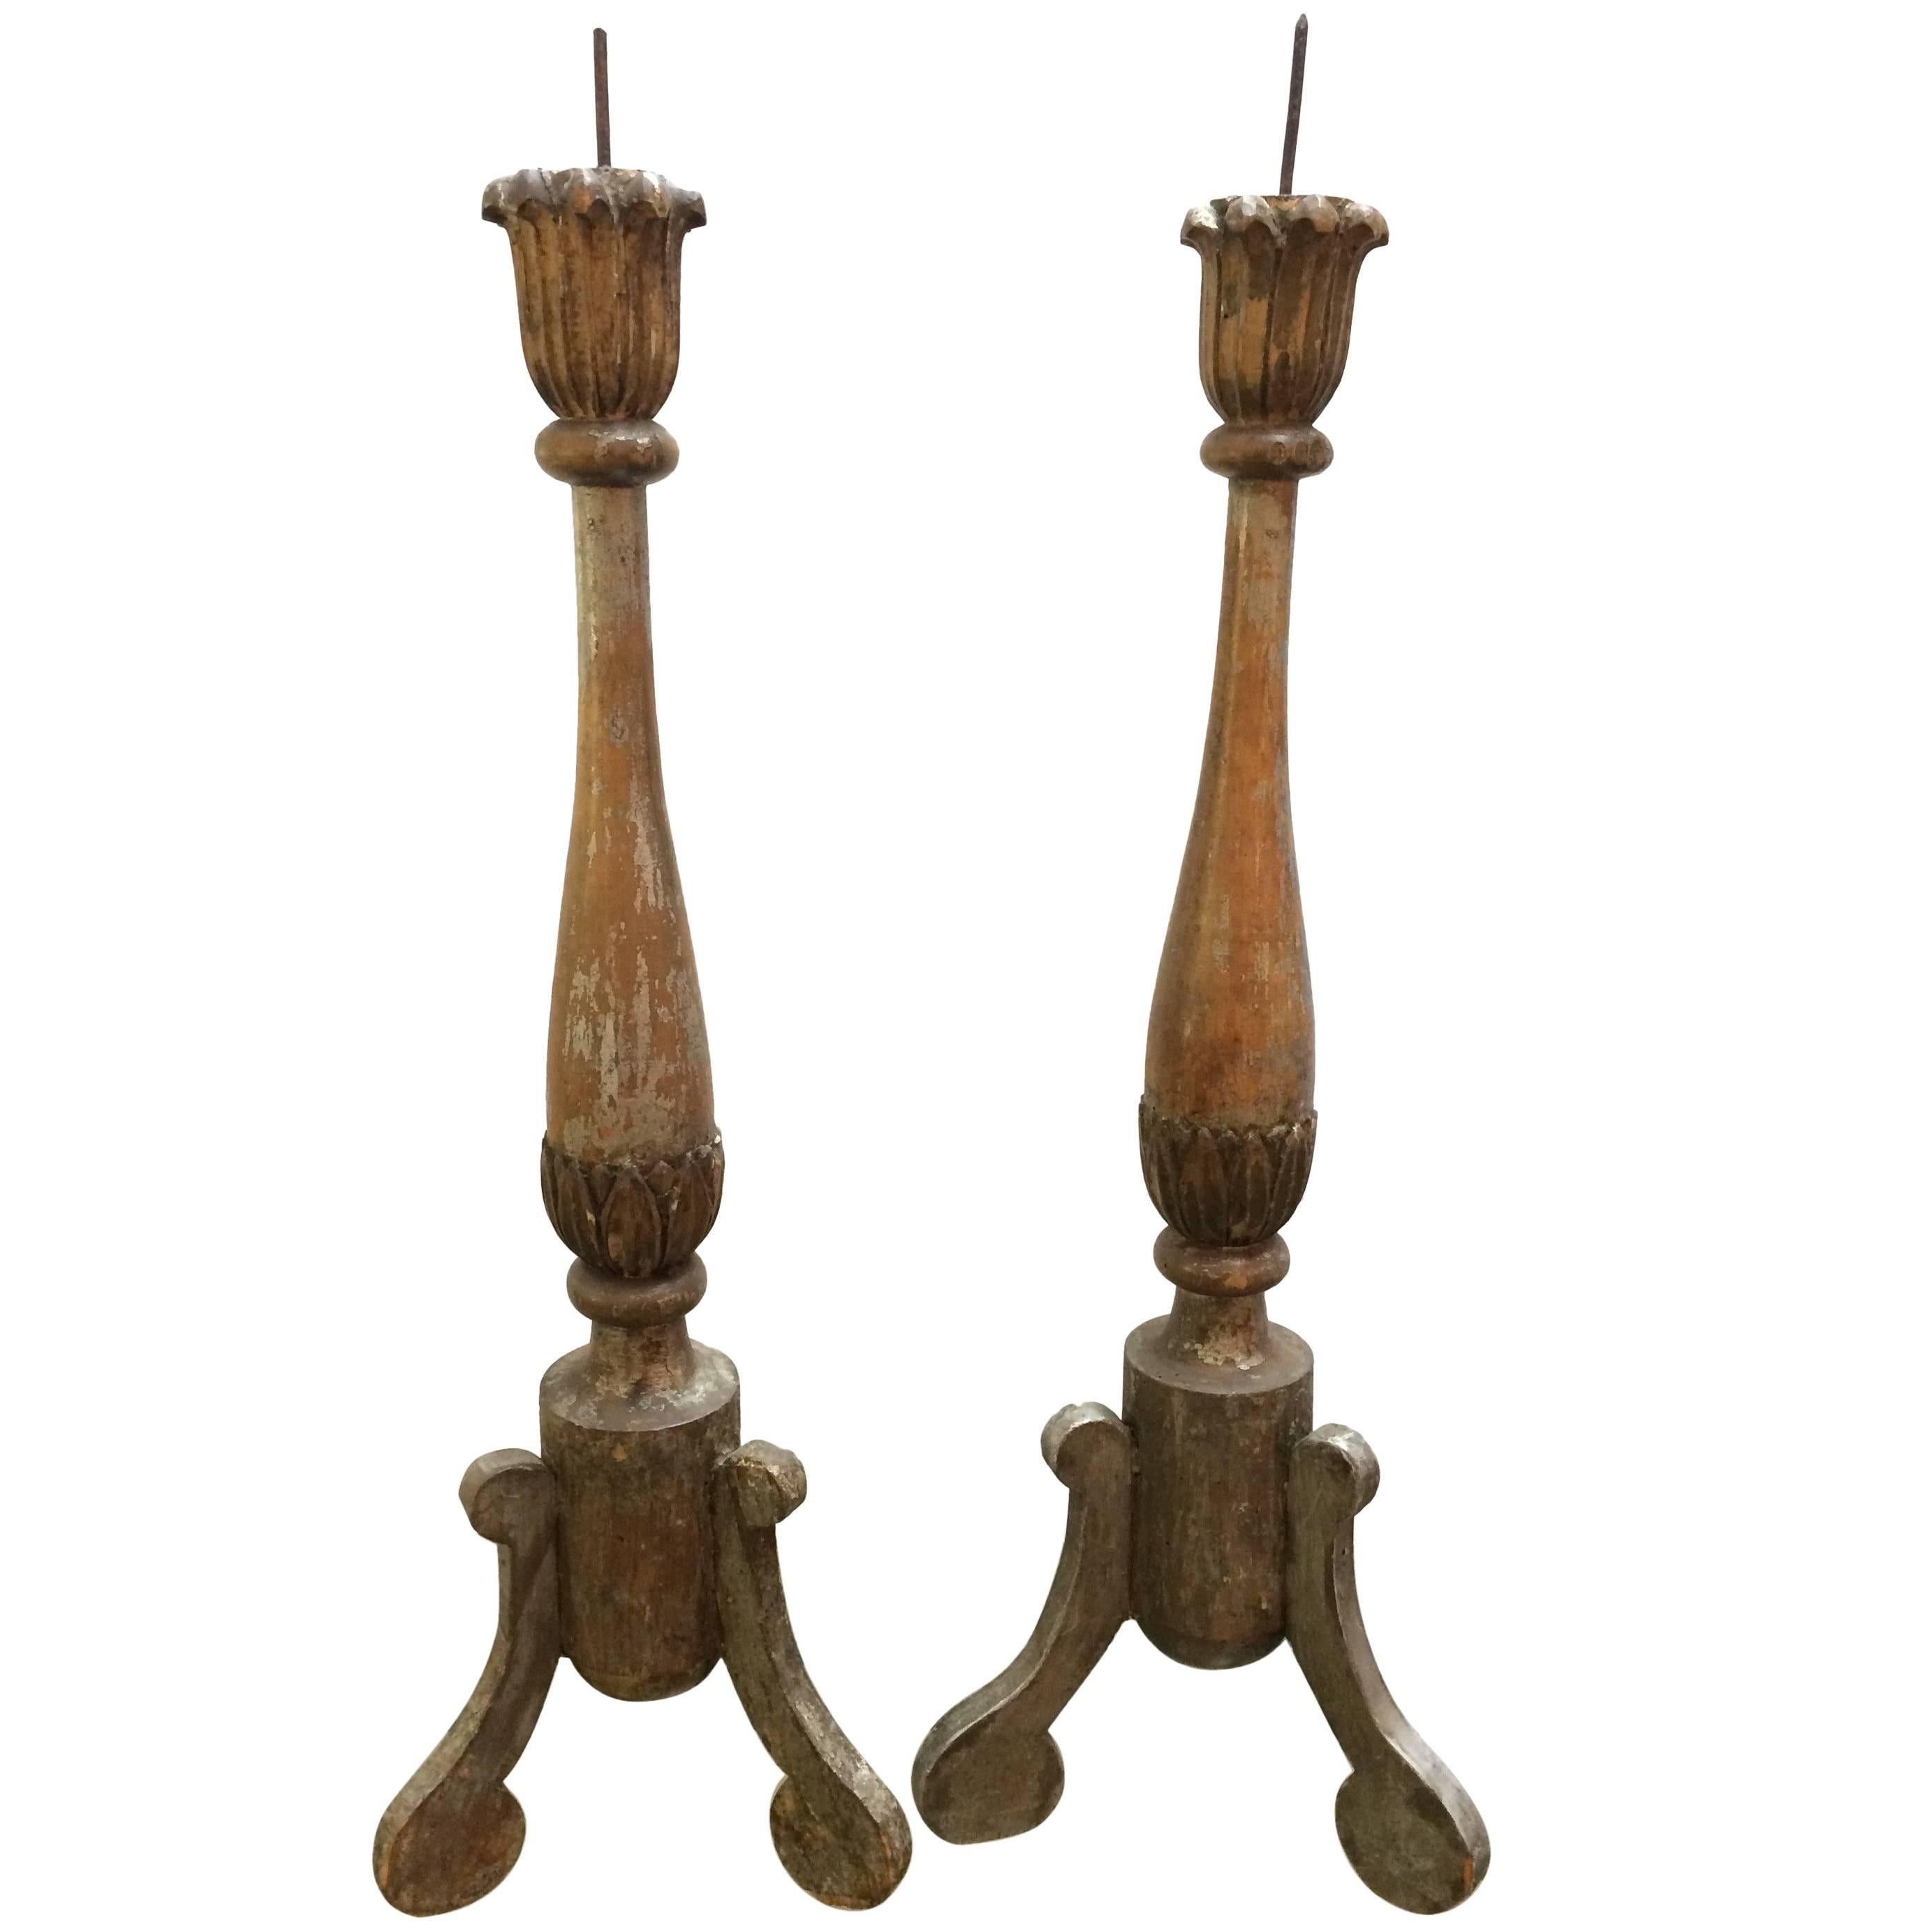 Pair of 19th Century Silverleaf Carved Wood French Pricket Candlesticks